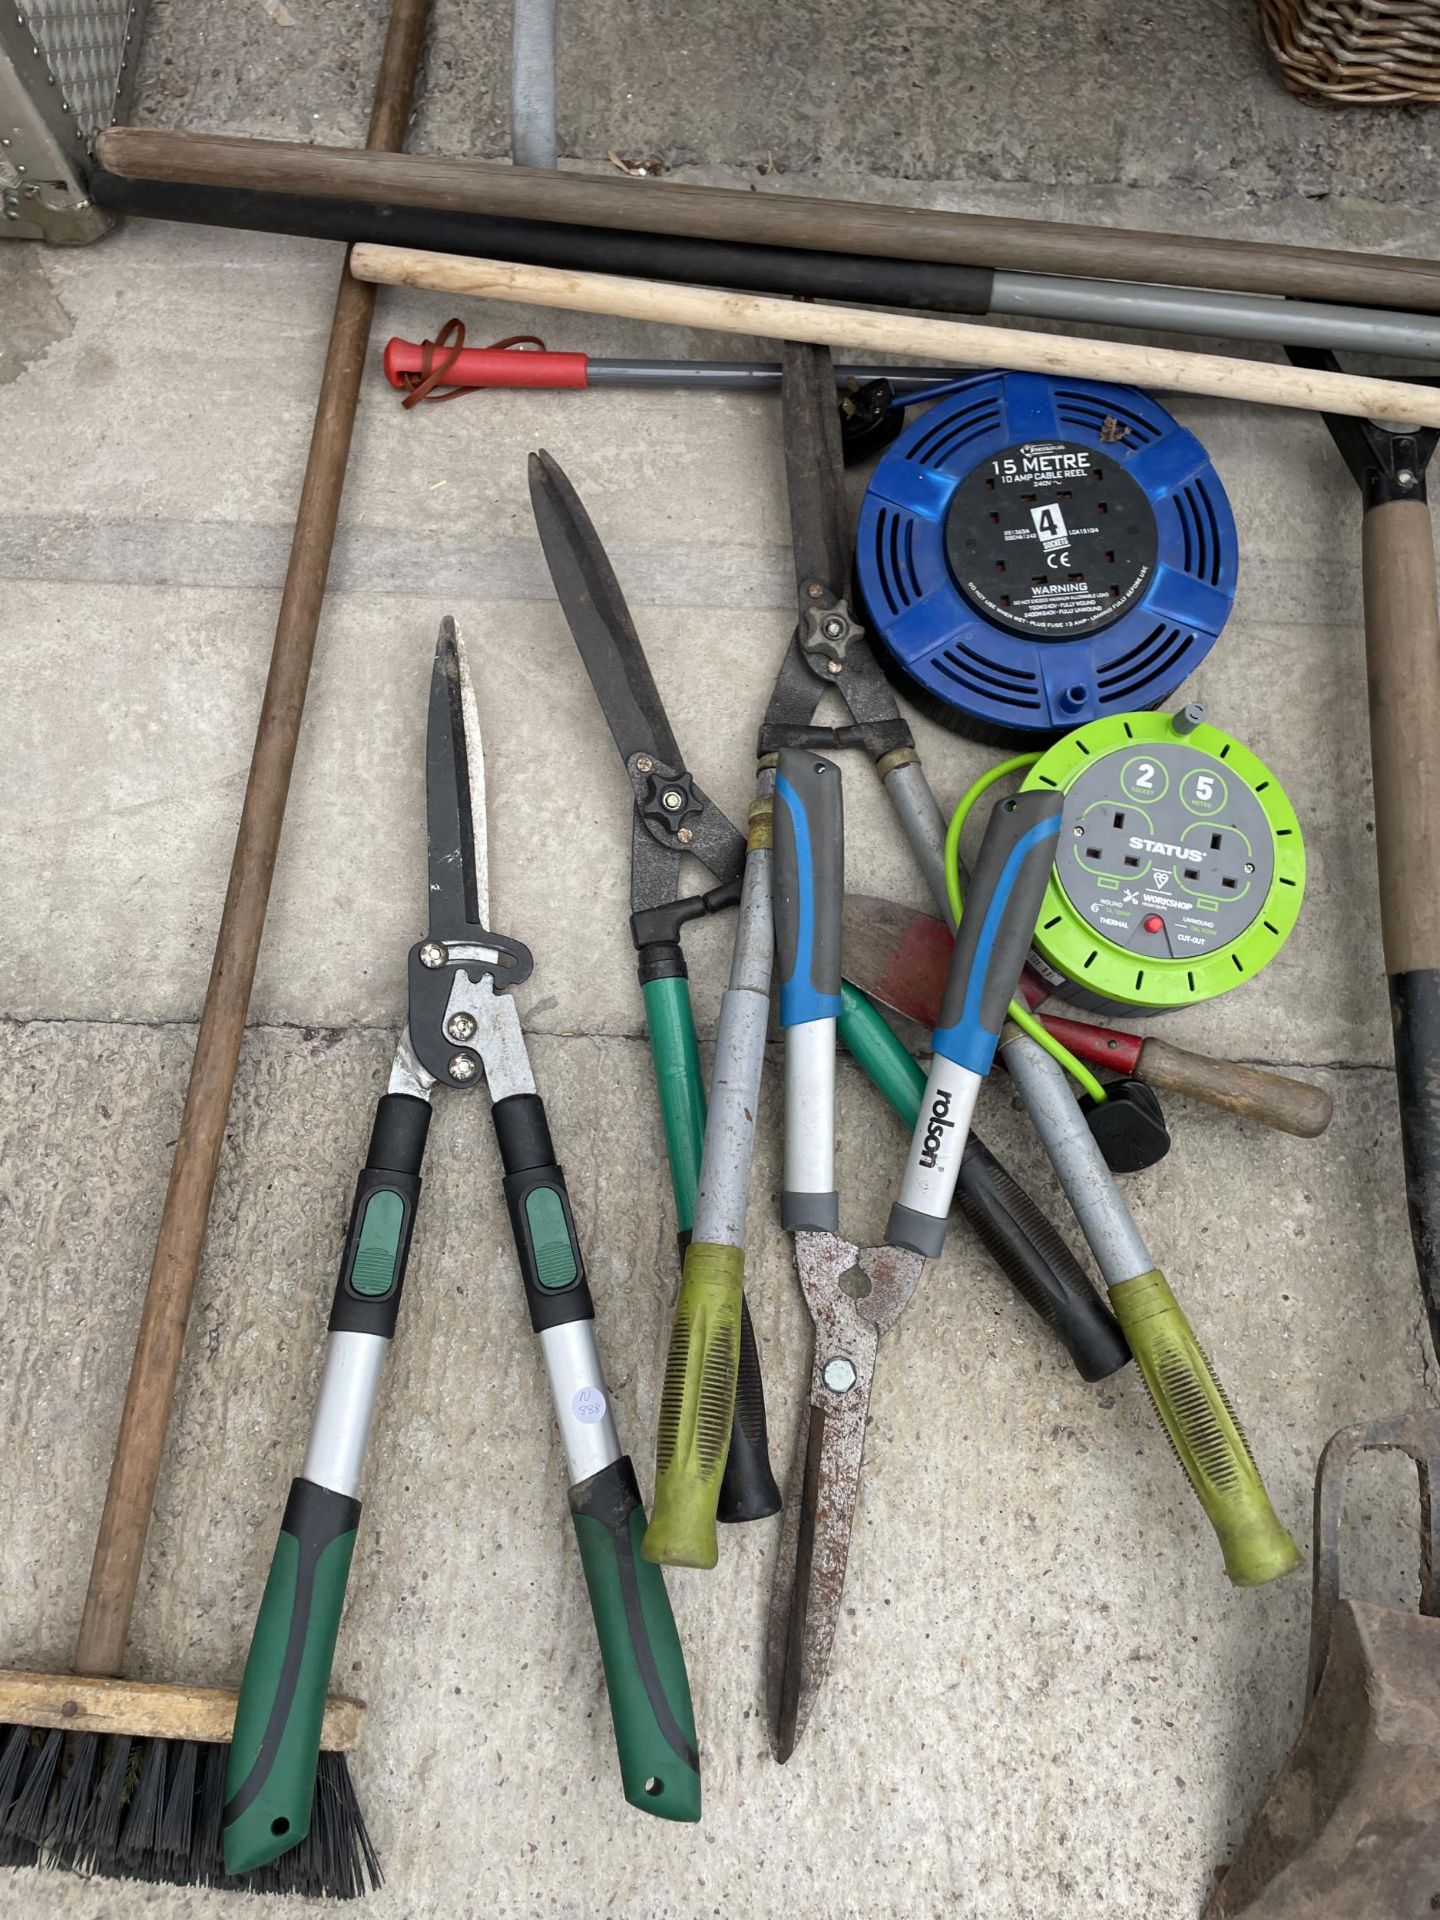 AN ASSORTMENT OF GARDEN TOOLS TO INCLUDE A SPADE, A FORK, SHEARS AND EXTENSION LEADS ETC - Image 3 of 3